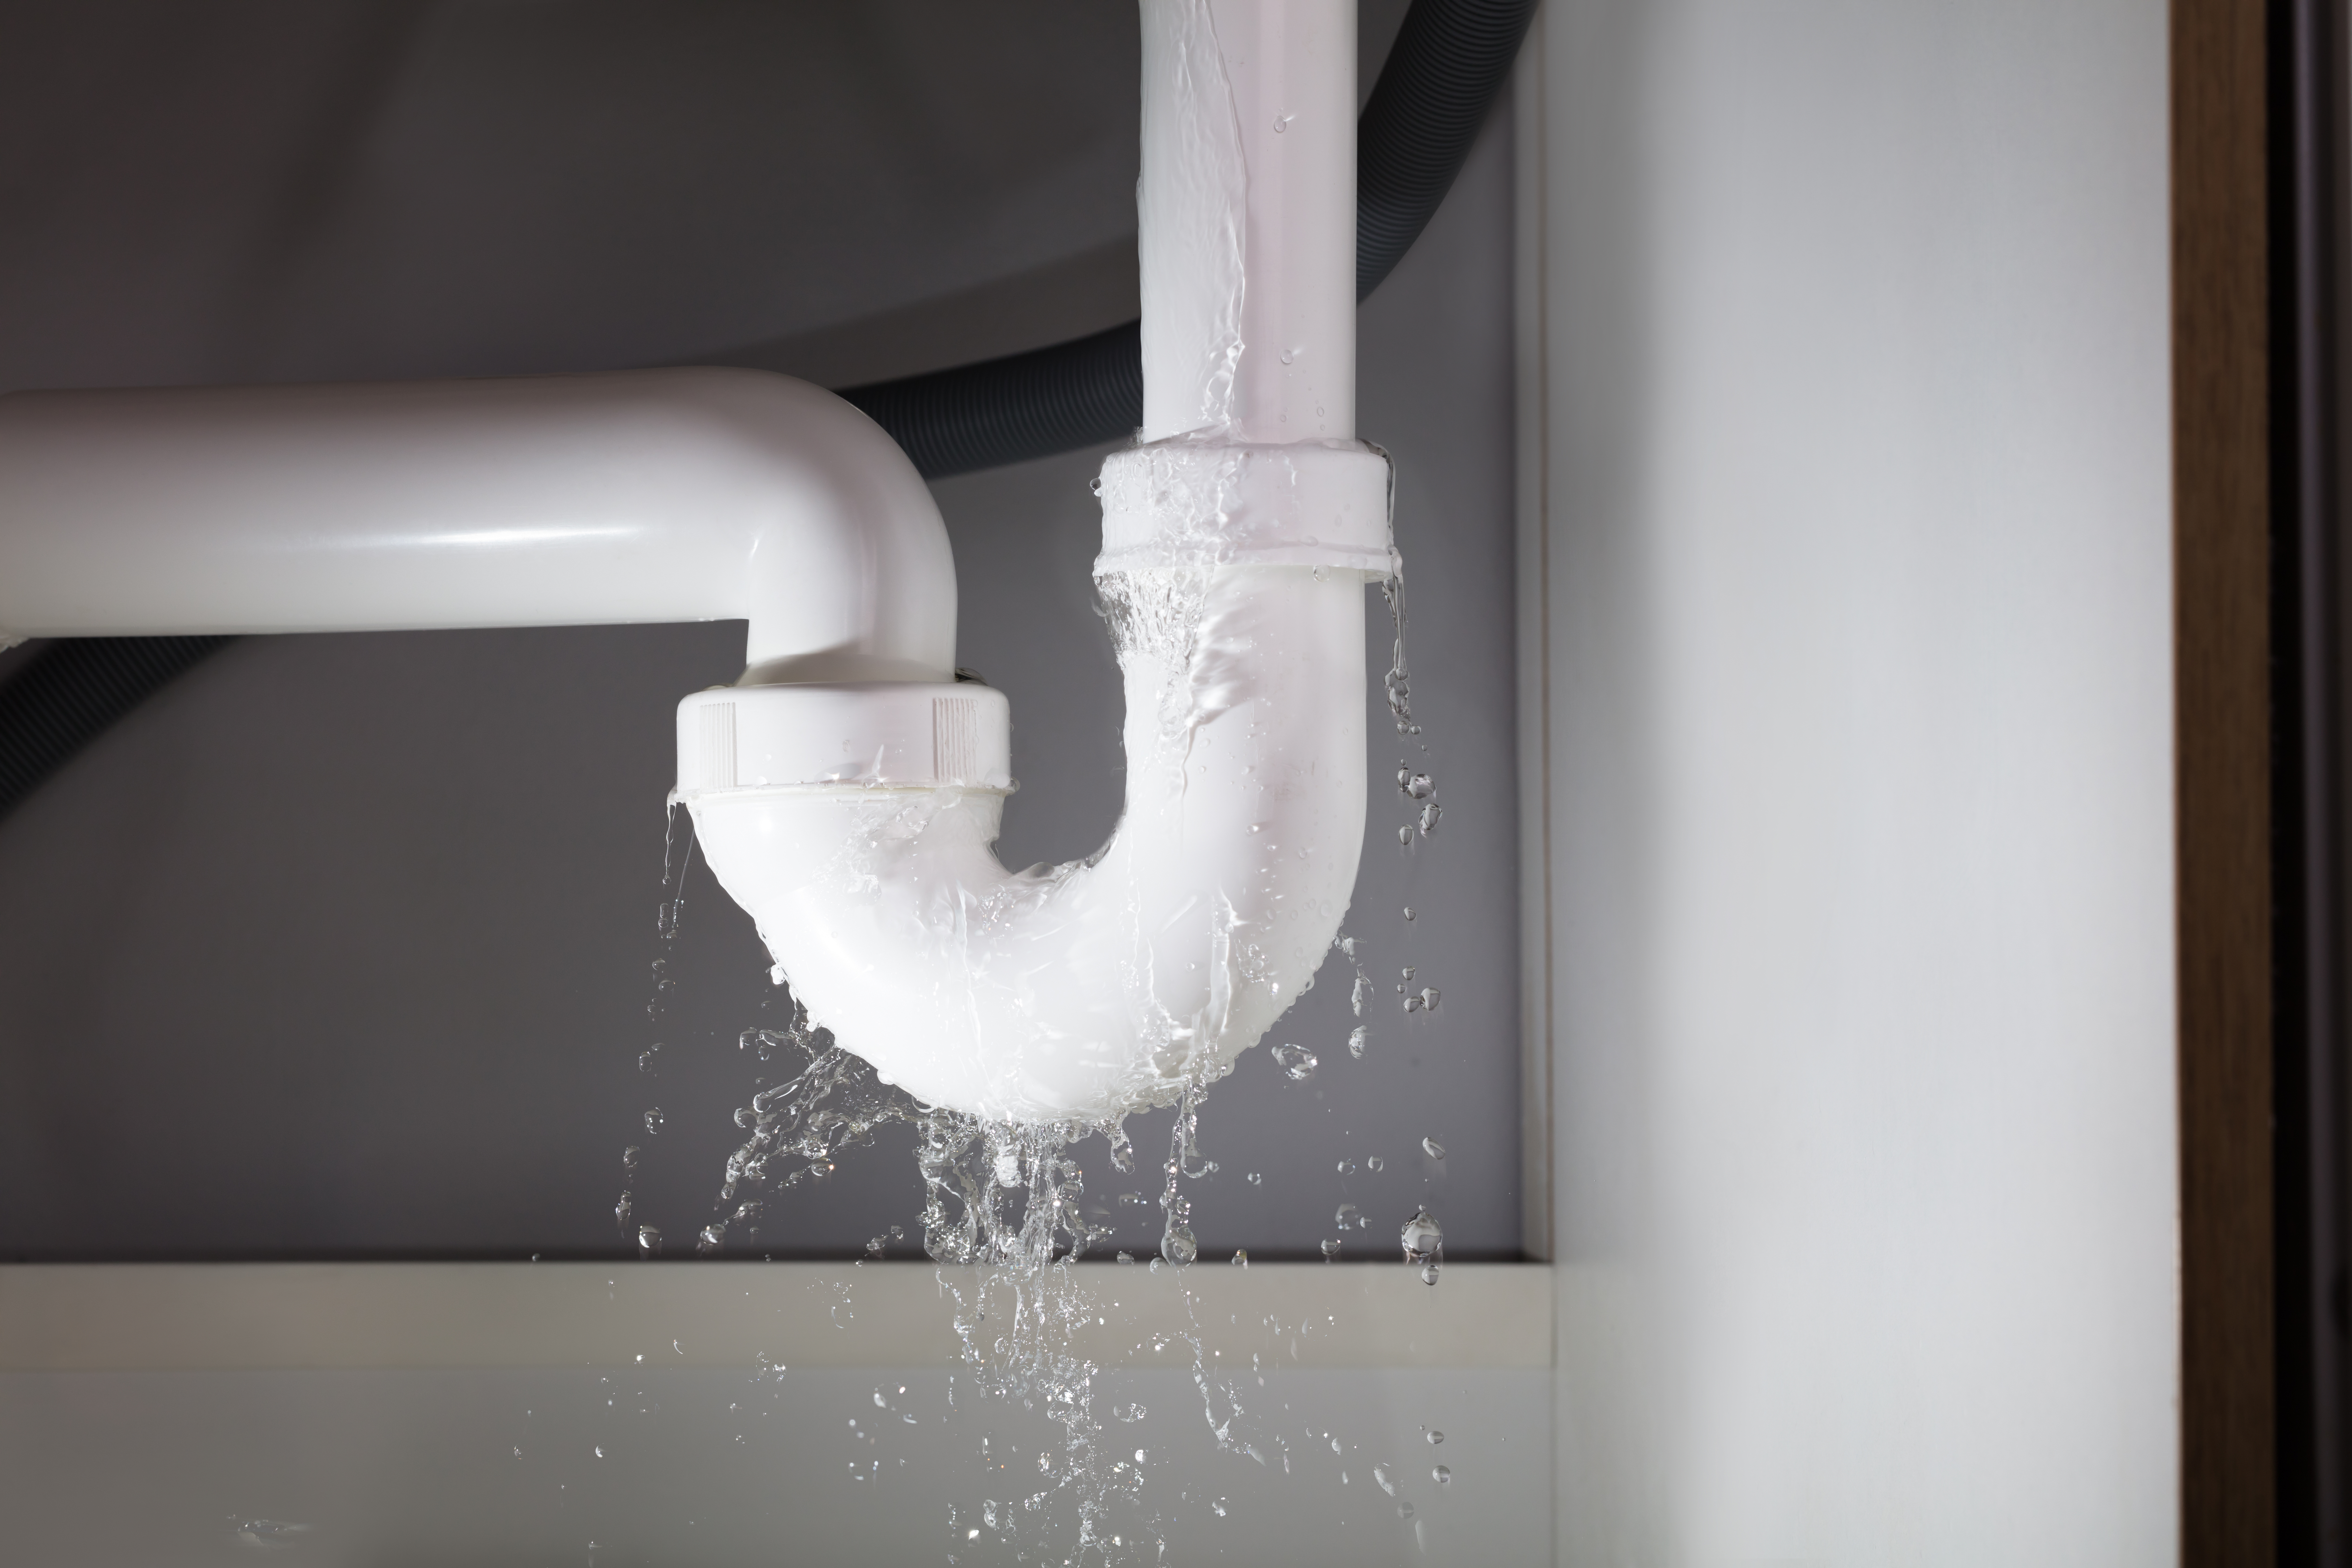 Water leaking from a kitchen sink drain pipe | Source: Shutterstock